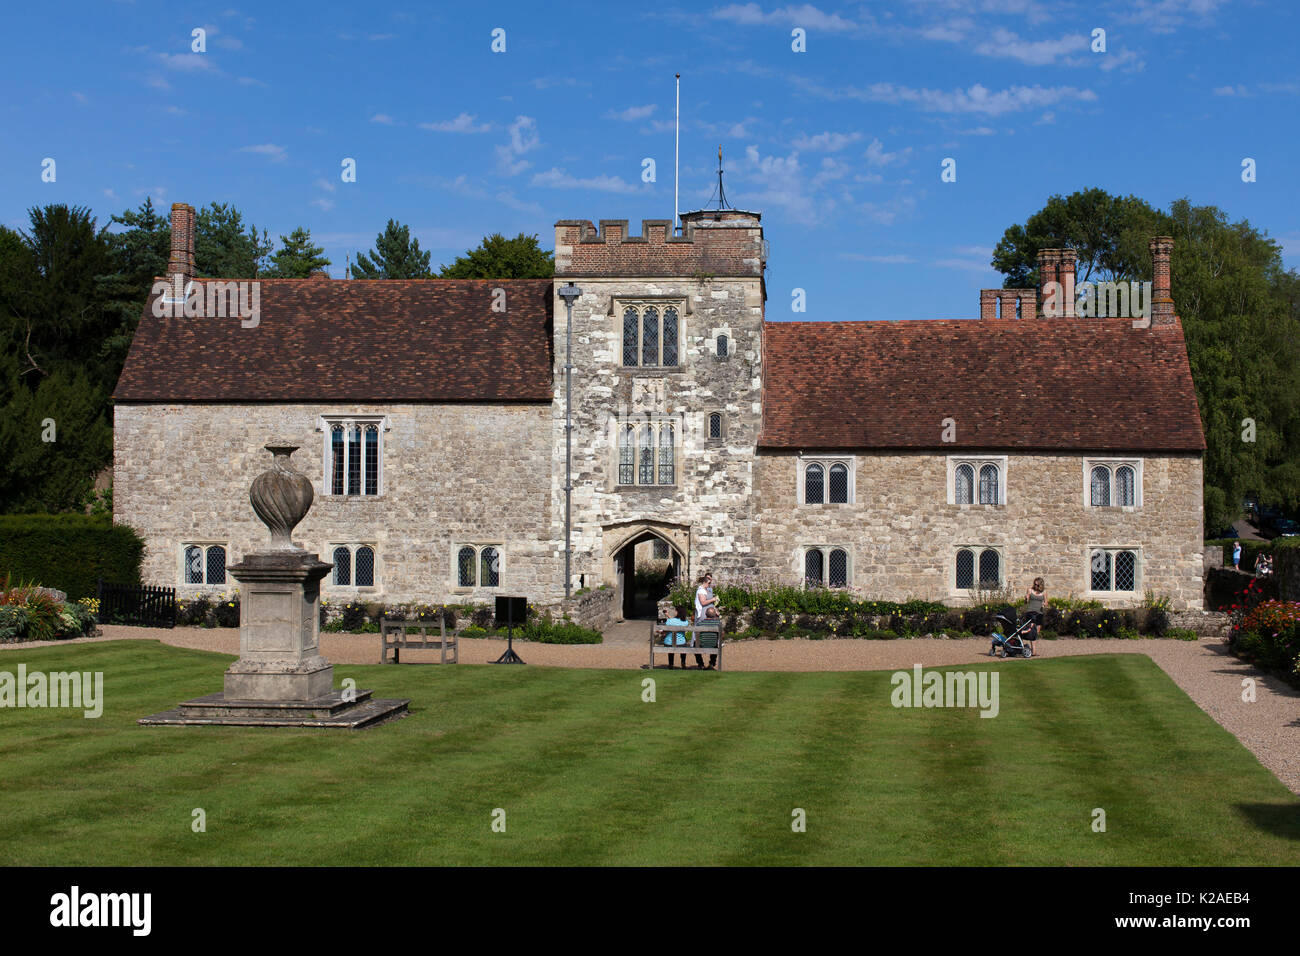 Ightham Kent Is A Medieval Moated Manor House The Architectural Stock Photo Alamy